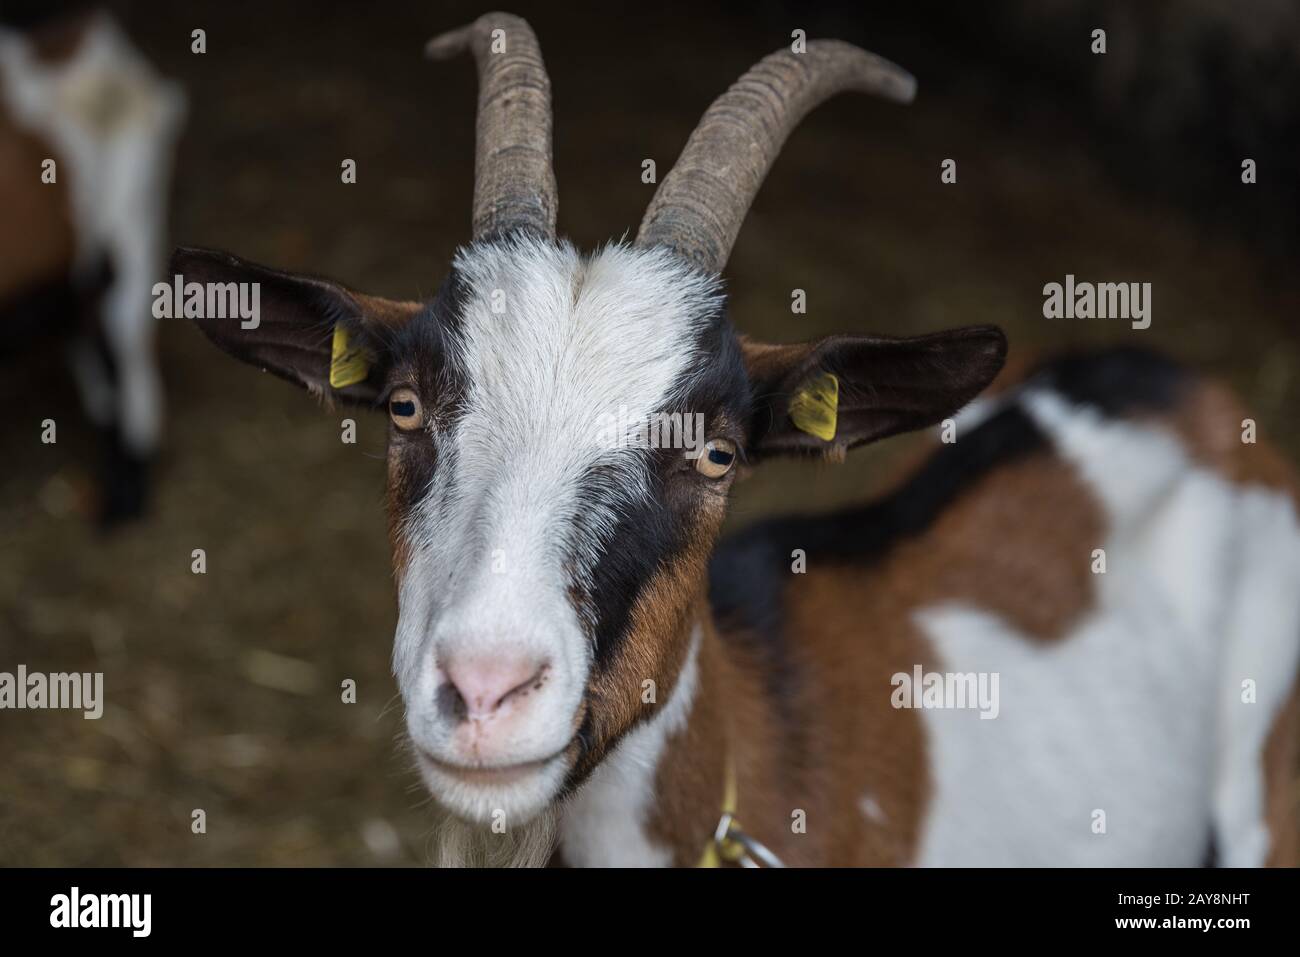 Goat looks curiously into camera - close-up animal portrait Stock Photo